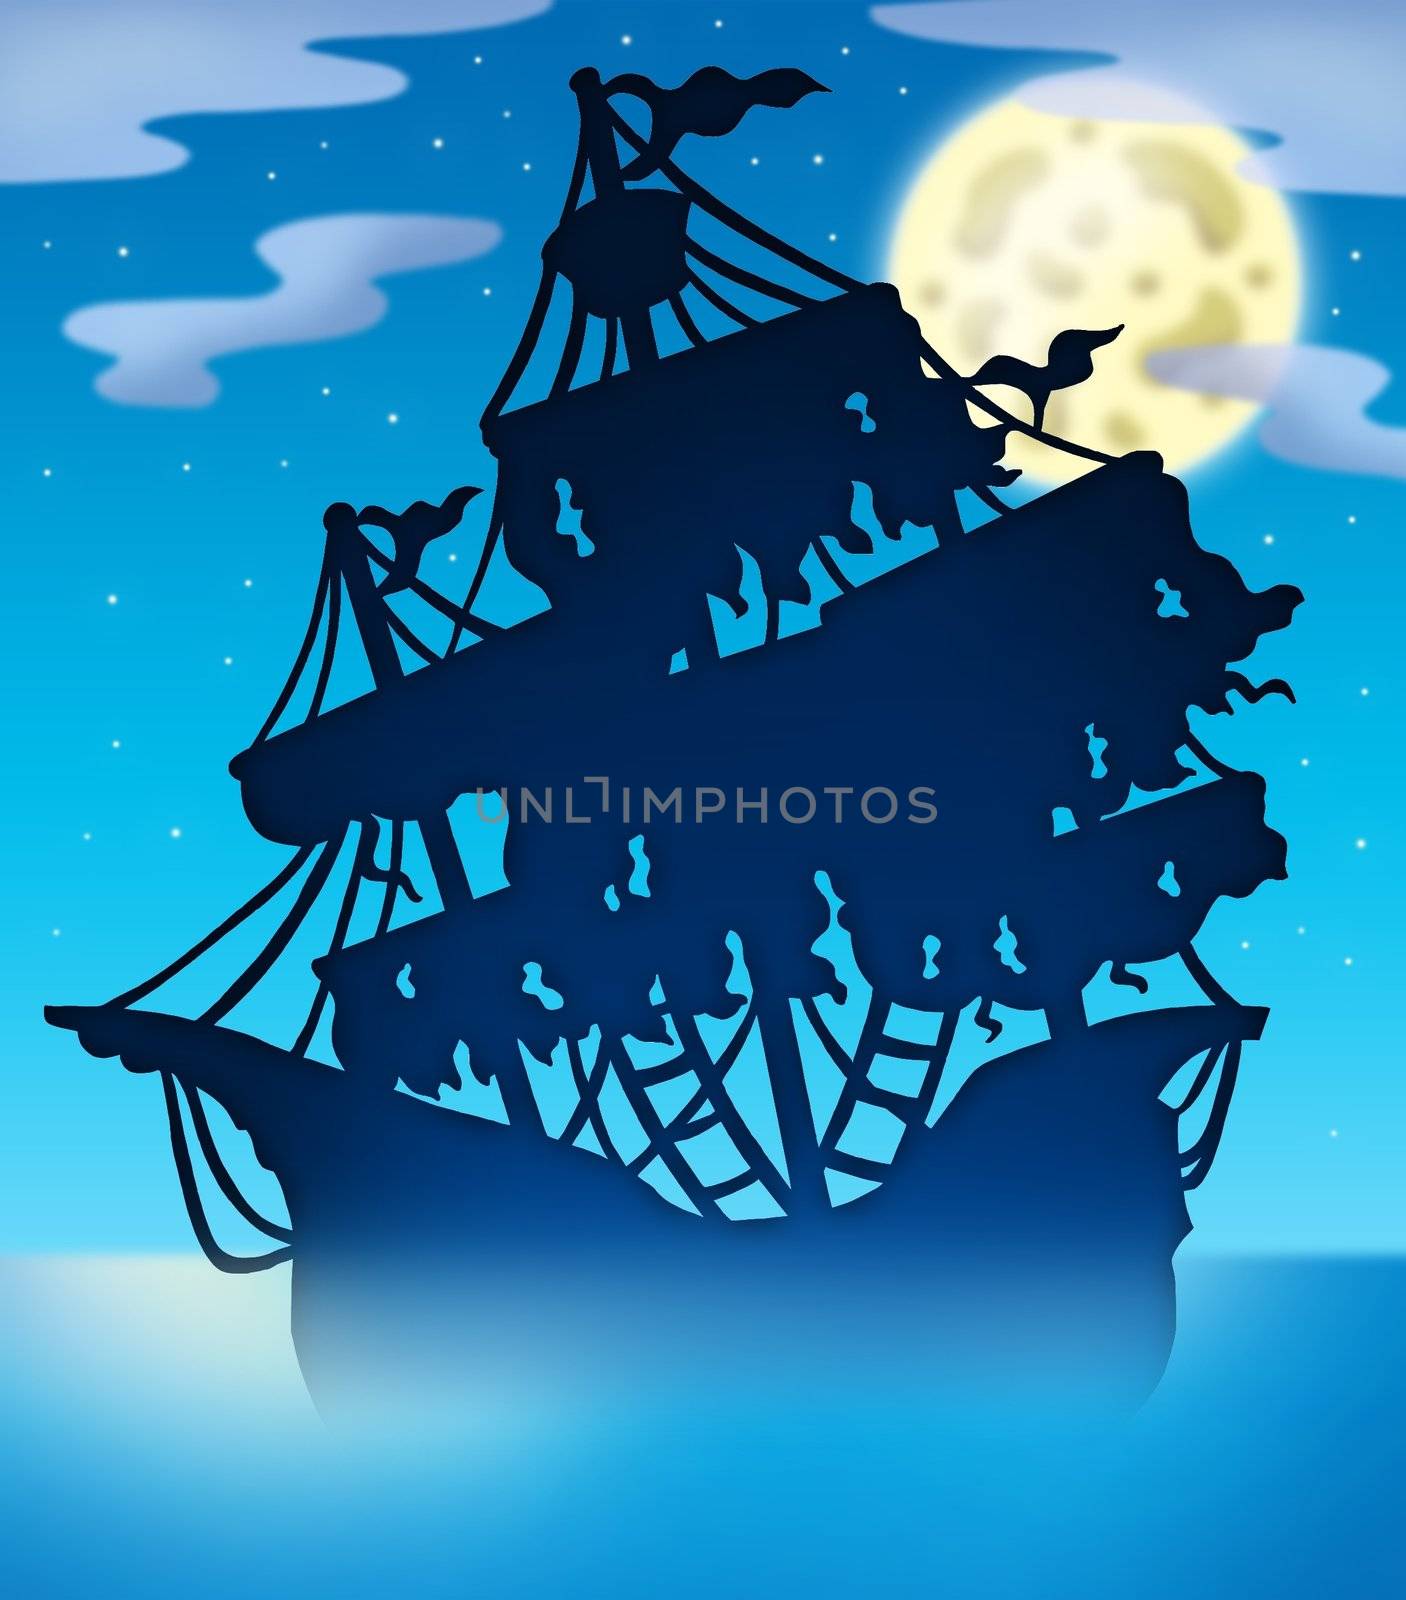 Mysterious ship silhouette at night by clairev